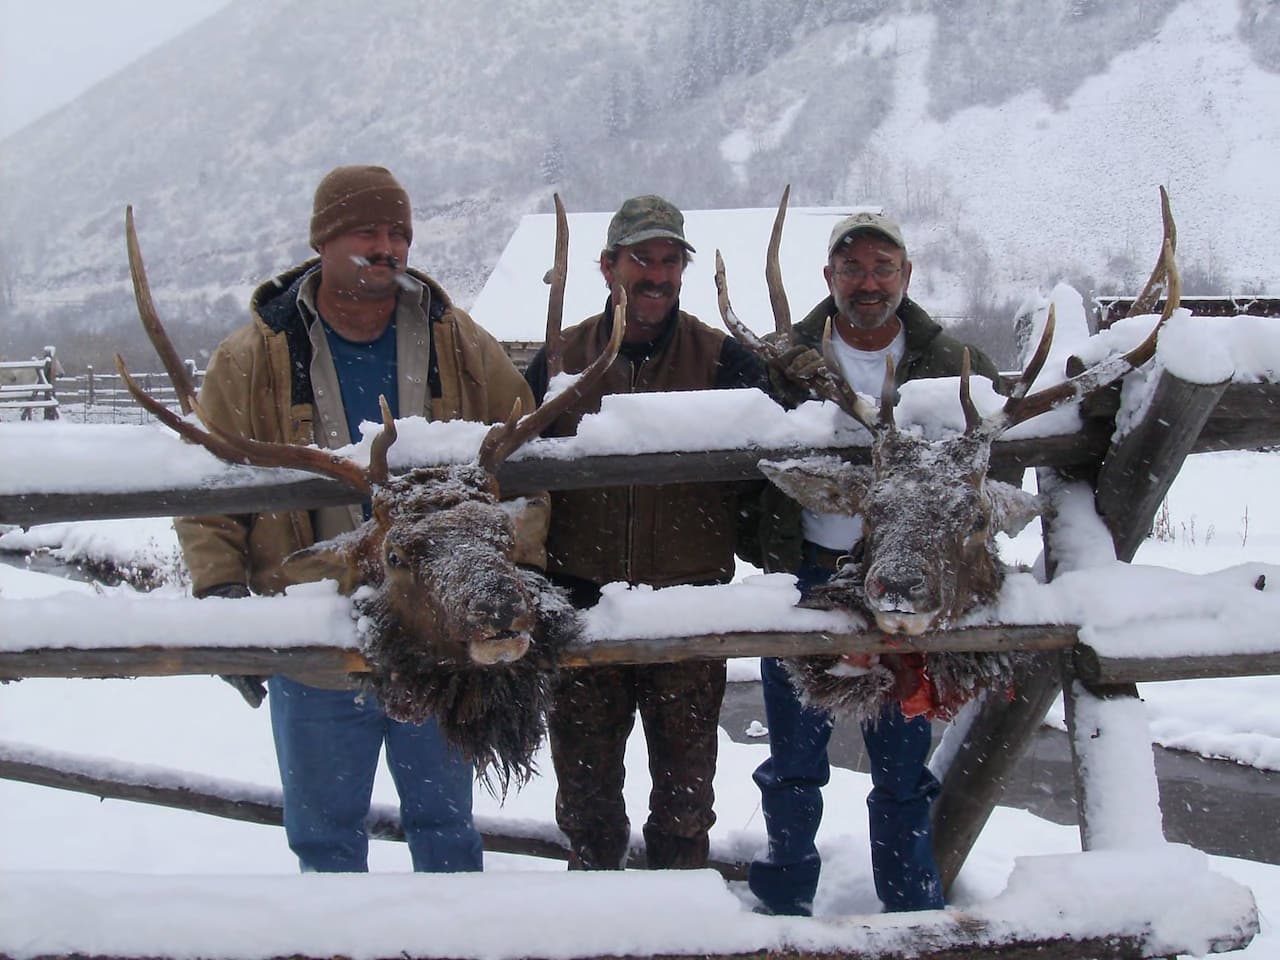 Gallery of Hunting images